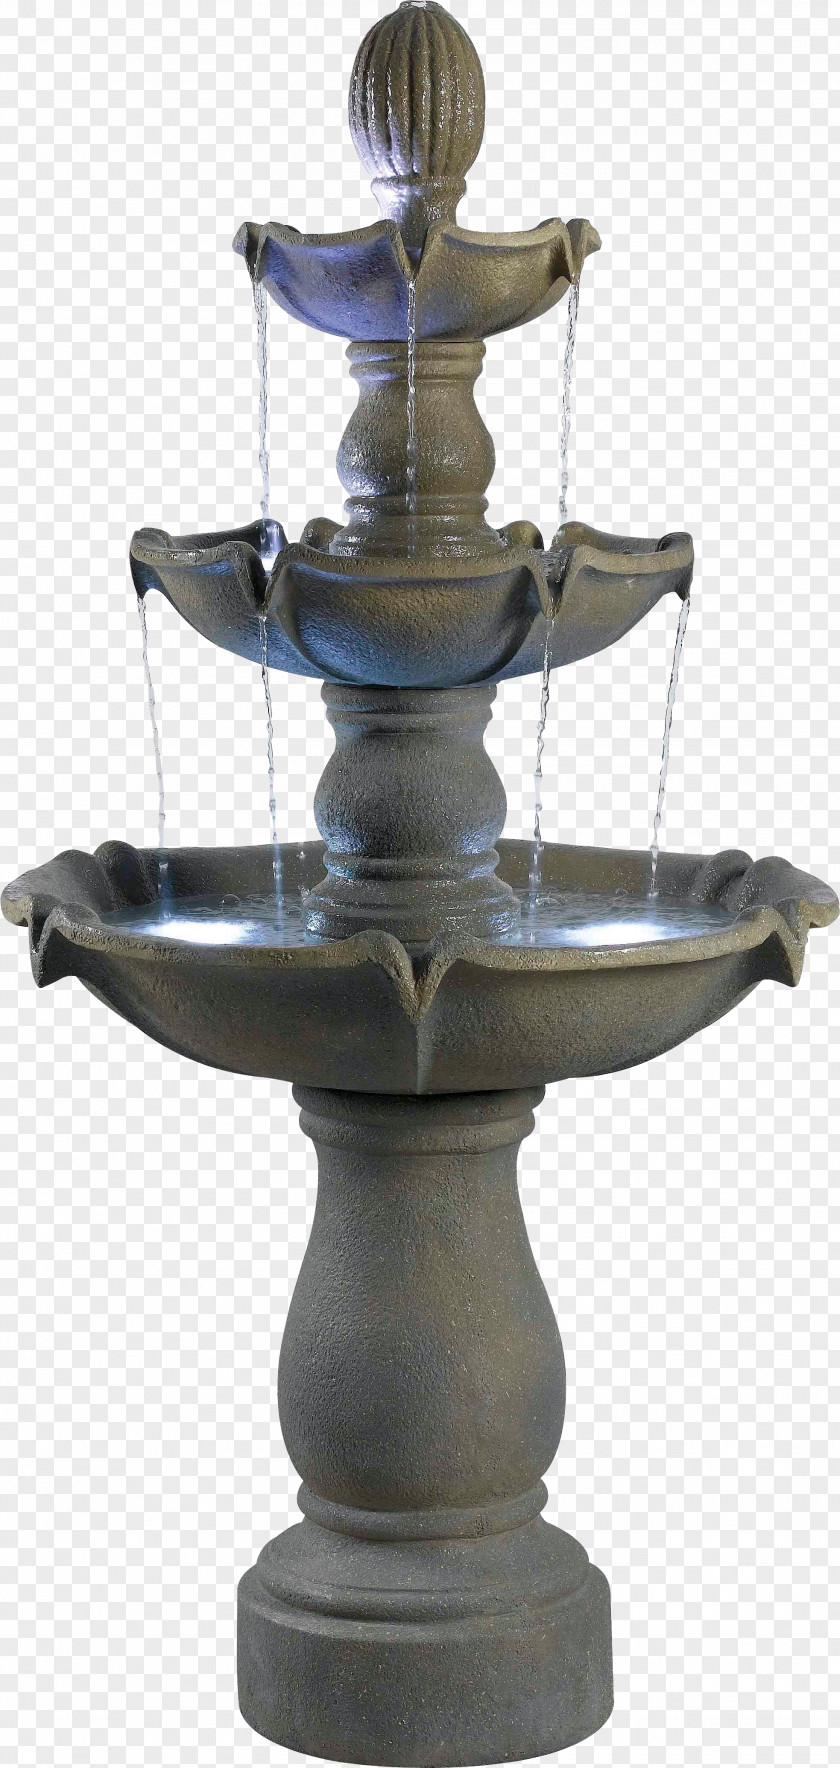 Fountain PNG clipart PNG